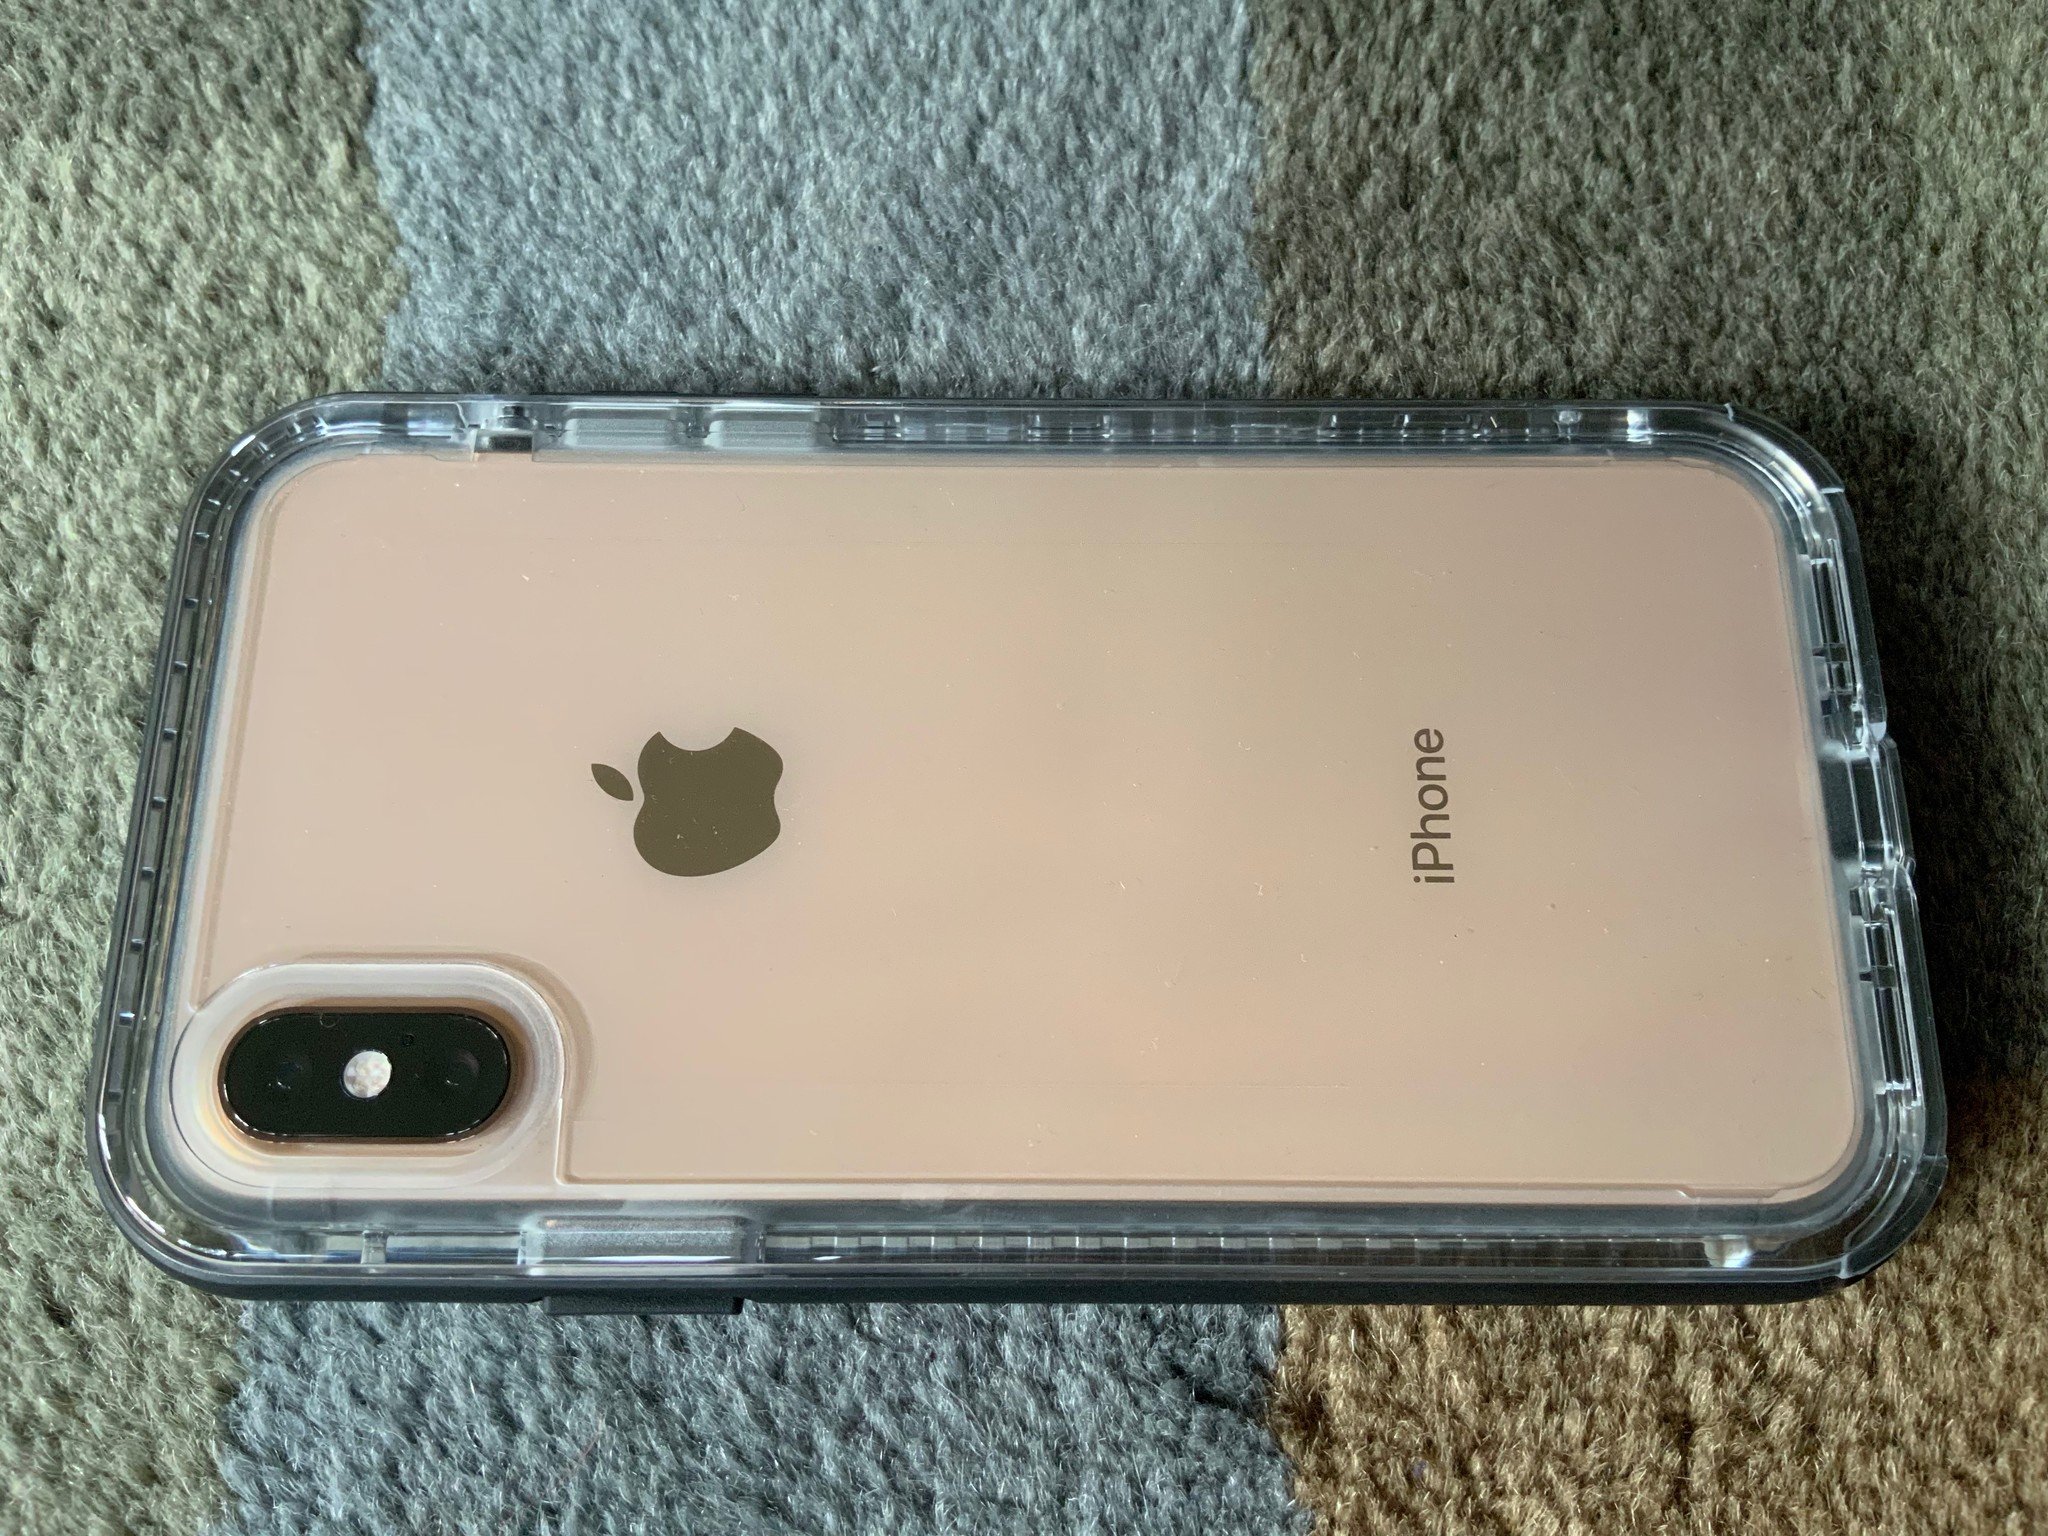 lifeproof iphone case review